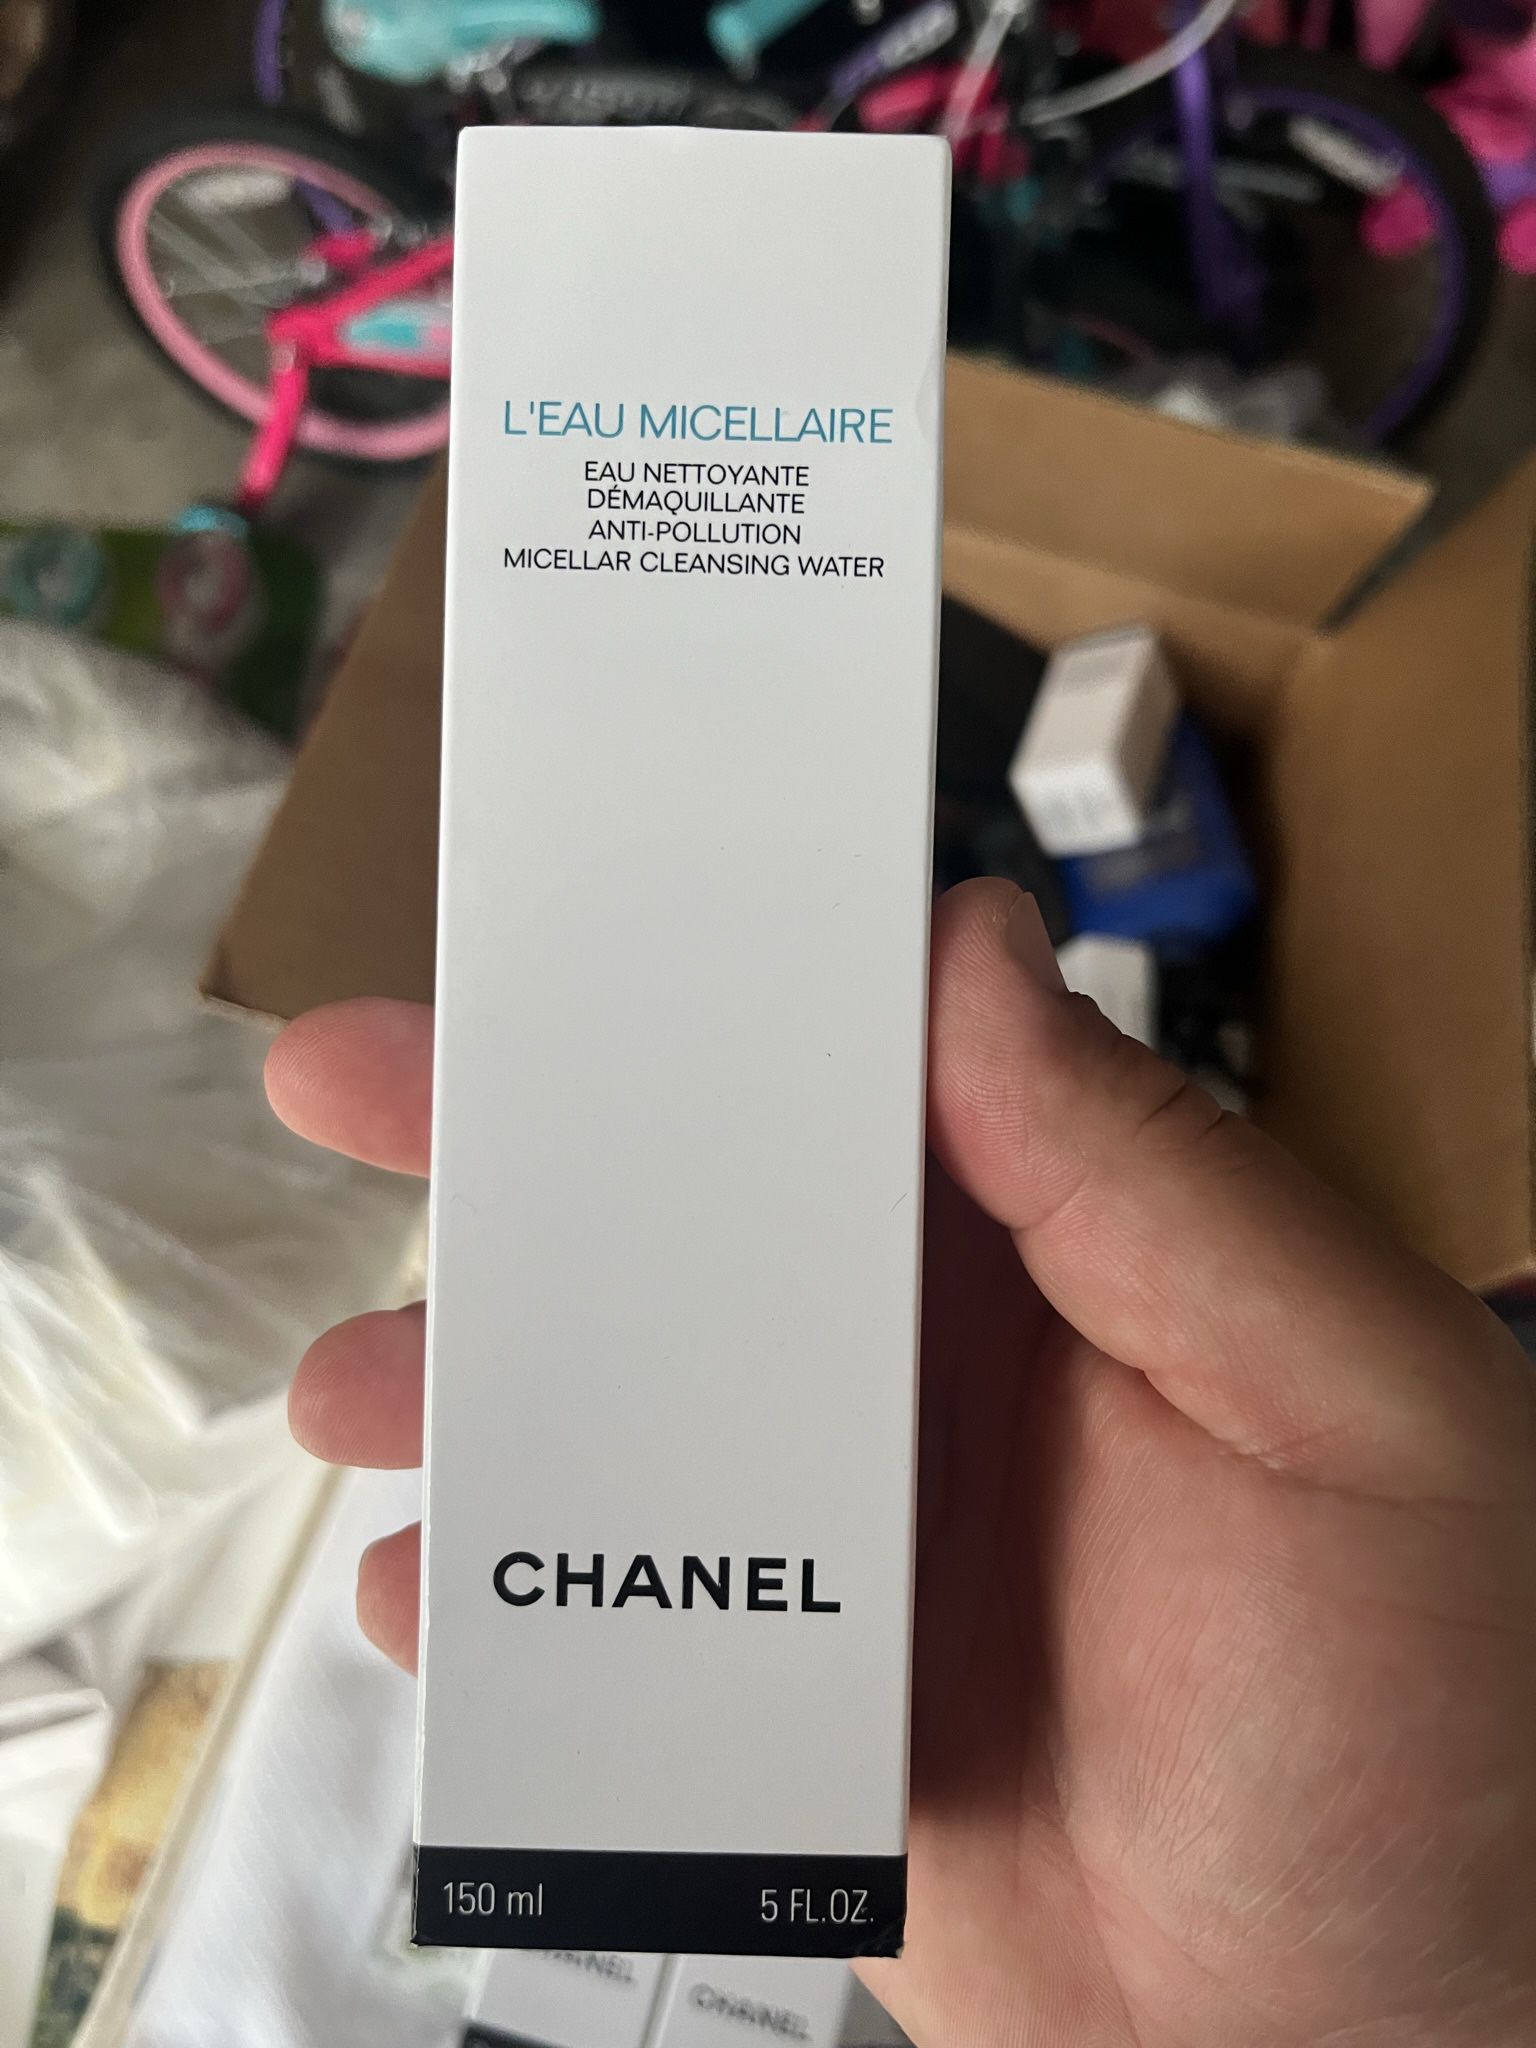 Chanel L'eau Micellaire Anti Pollution Micellar Cleansing Water 5oz